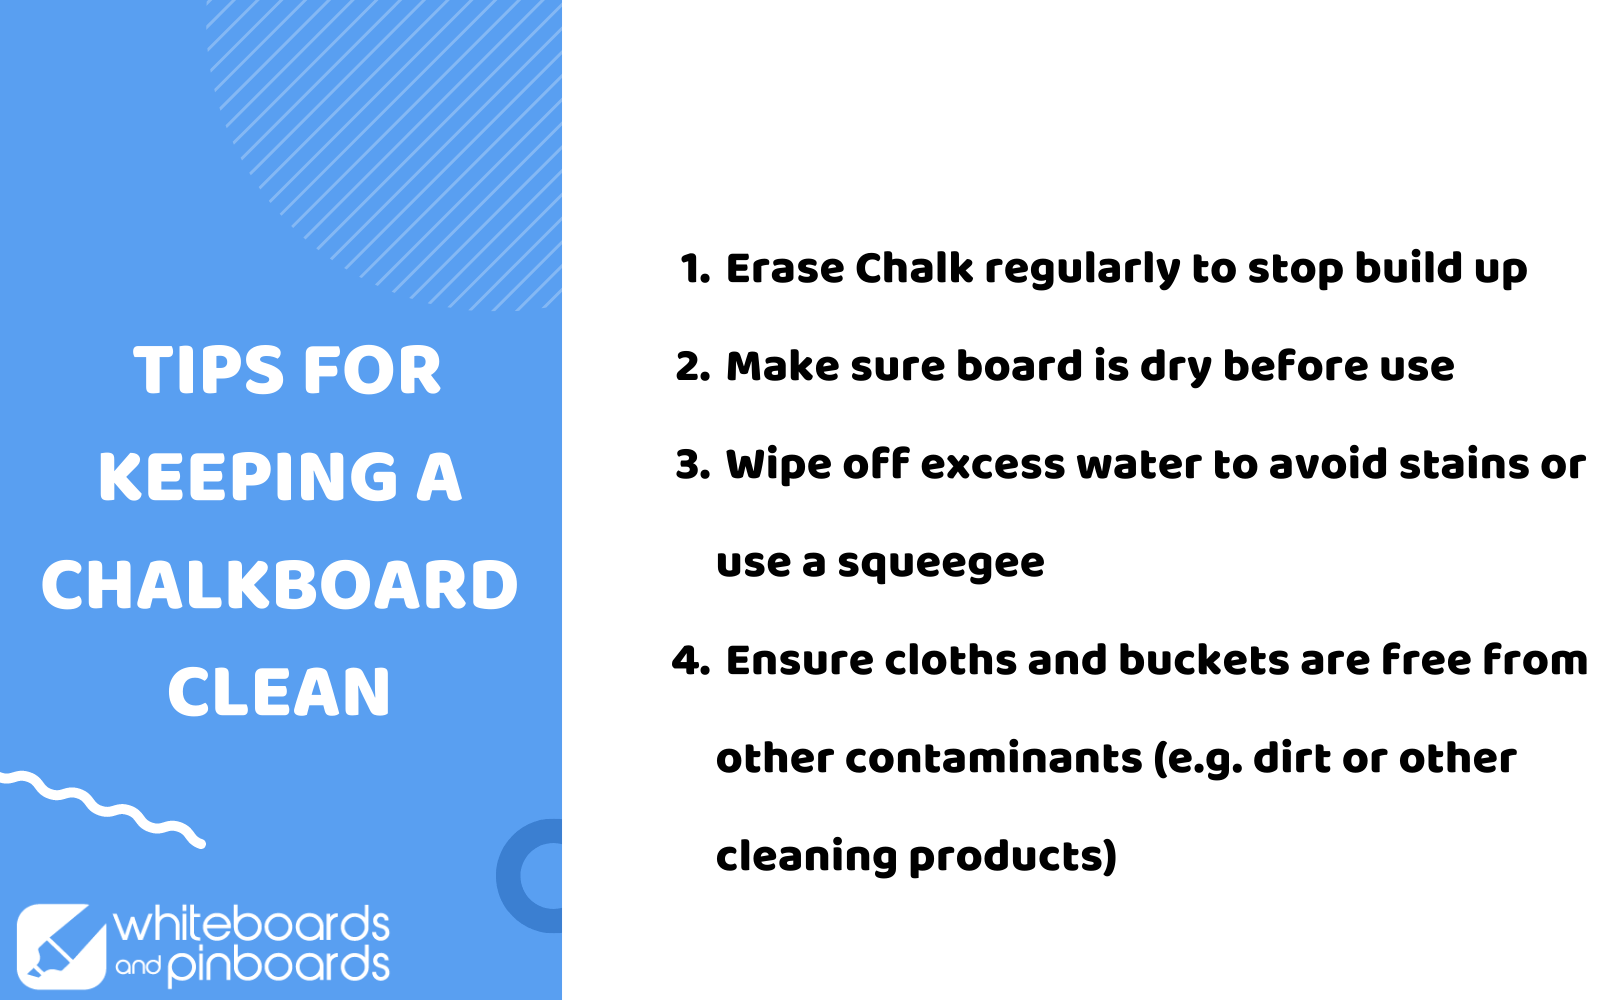 How to Clean a Chalkboard - 12 Tips for Keeping Chalkboards Clean